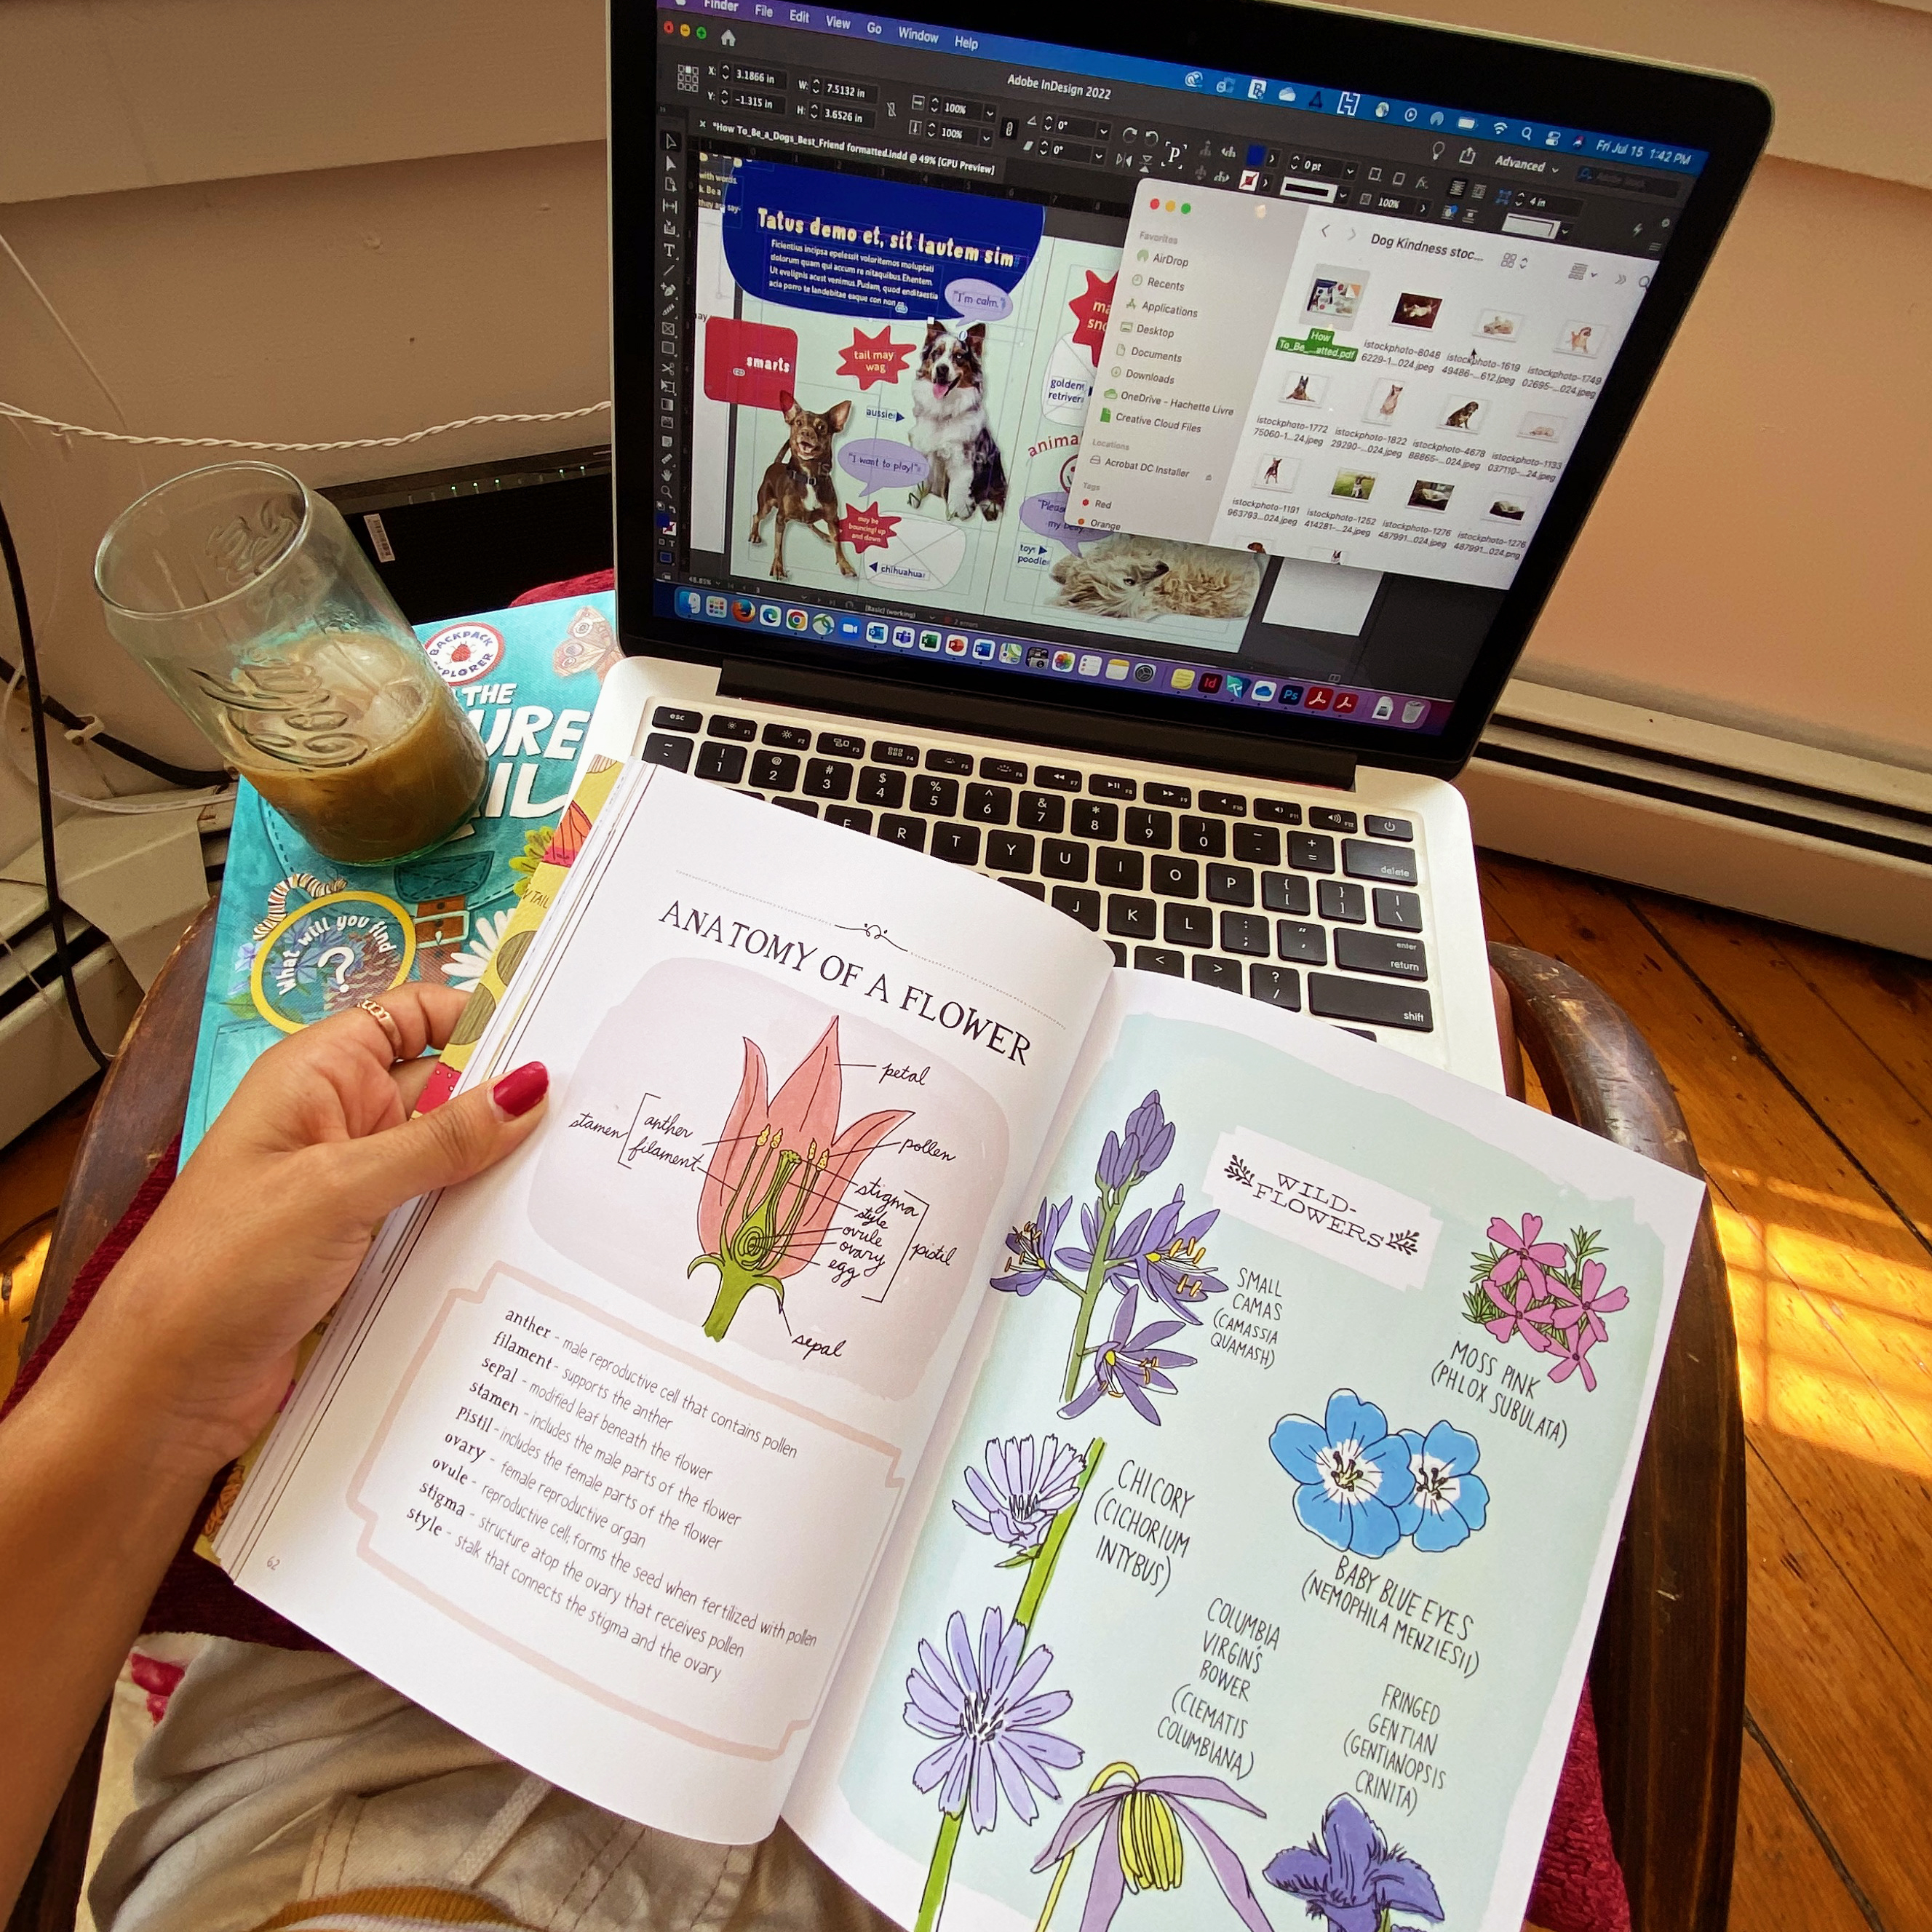 A photo of Graciela Batista 24 IL's work from home setup: a laptop, iced coffee, and illustration book